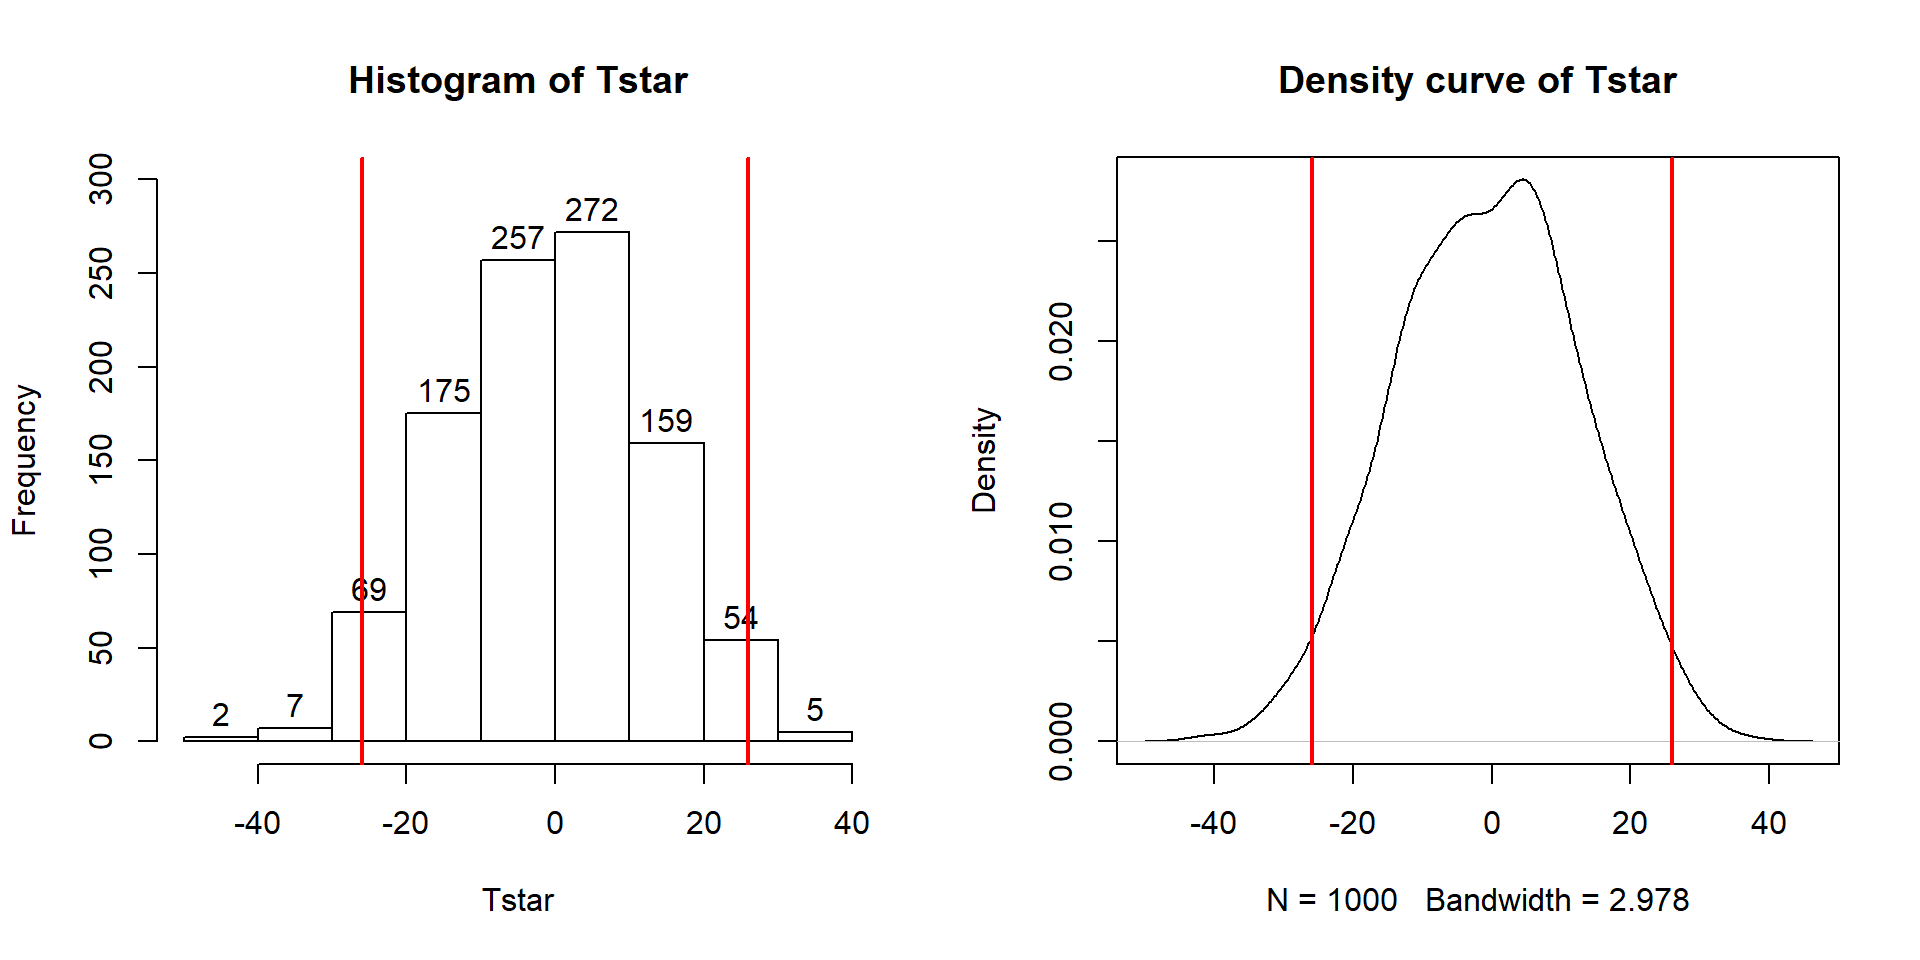 Histogram and density curve of values of test statistic for 1,000 permutations with bold lines for value of observed test statistic (-25.933) and its opposite value (25.933) required for performing the two-sided test.